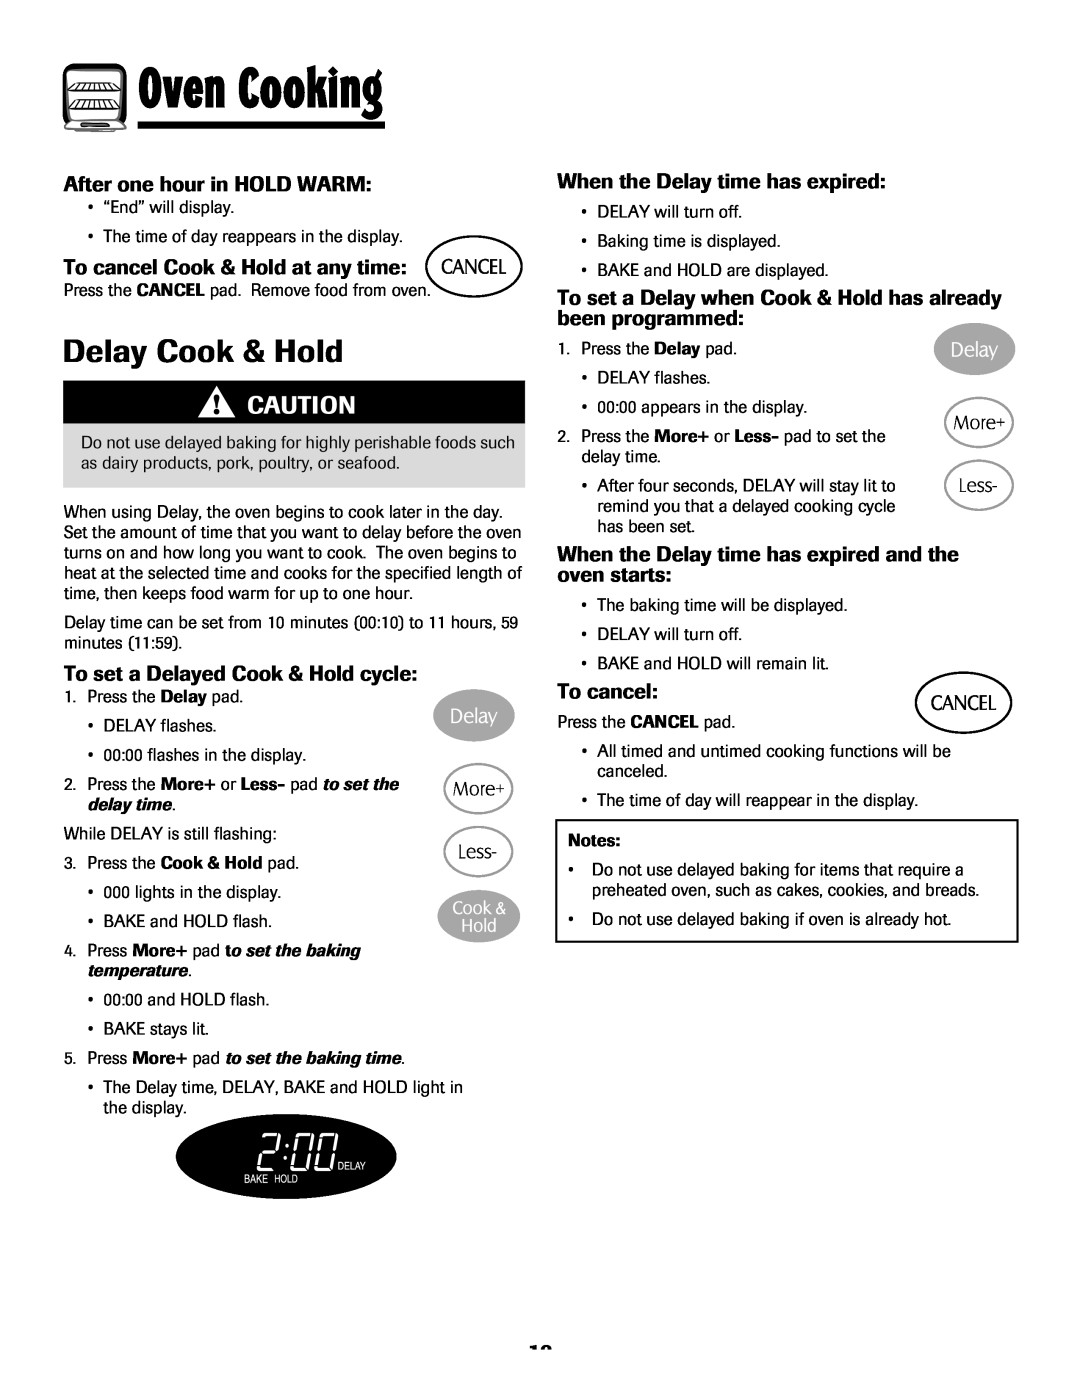 Maytag 8113P768-60 manual Delay Cook & Hold, After one hour in HOLD WARM, To cancel Cook & Hold at any time, Oven Cooking 